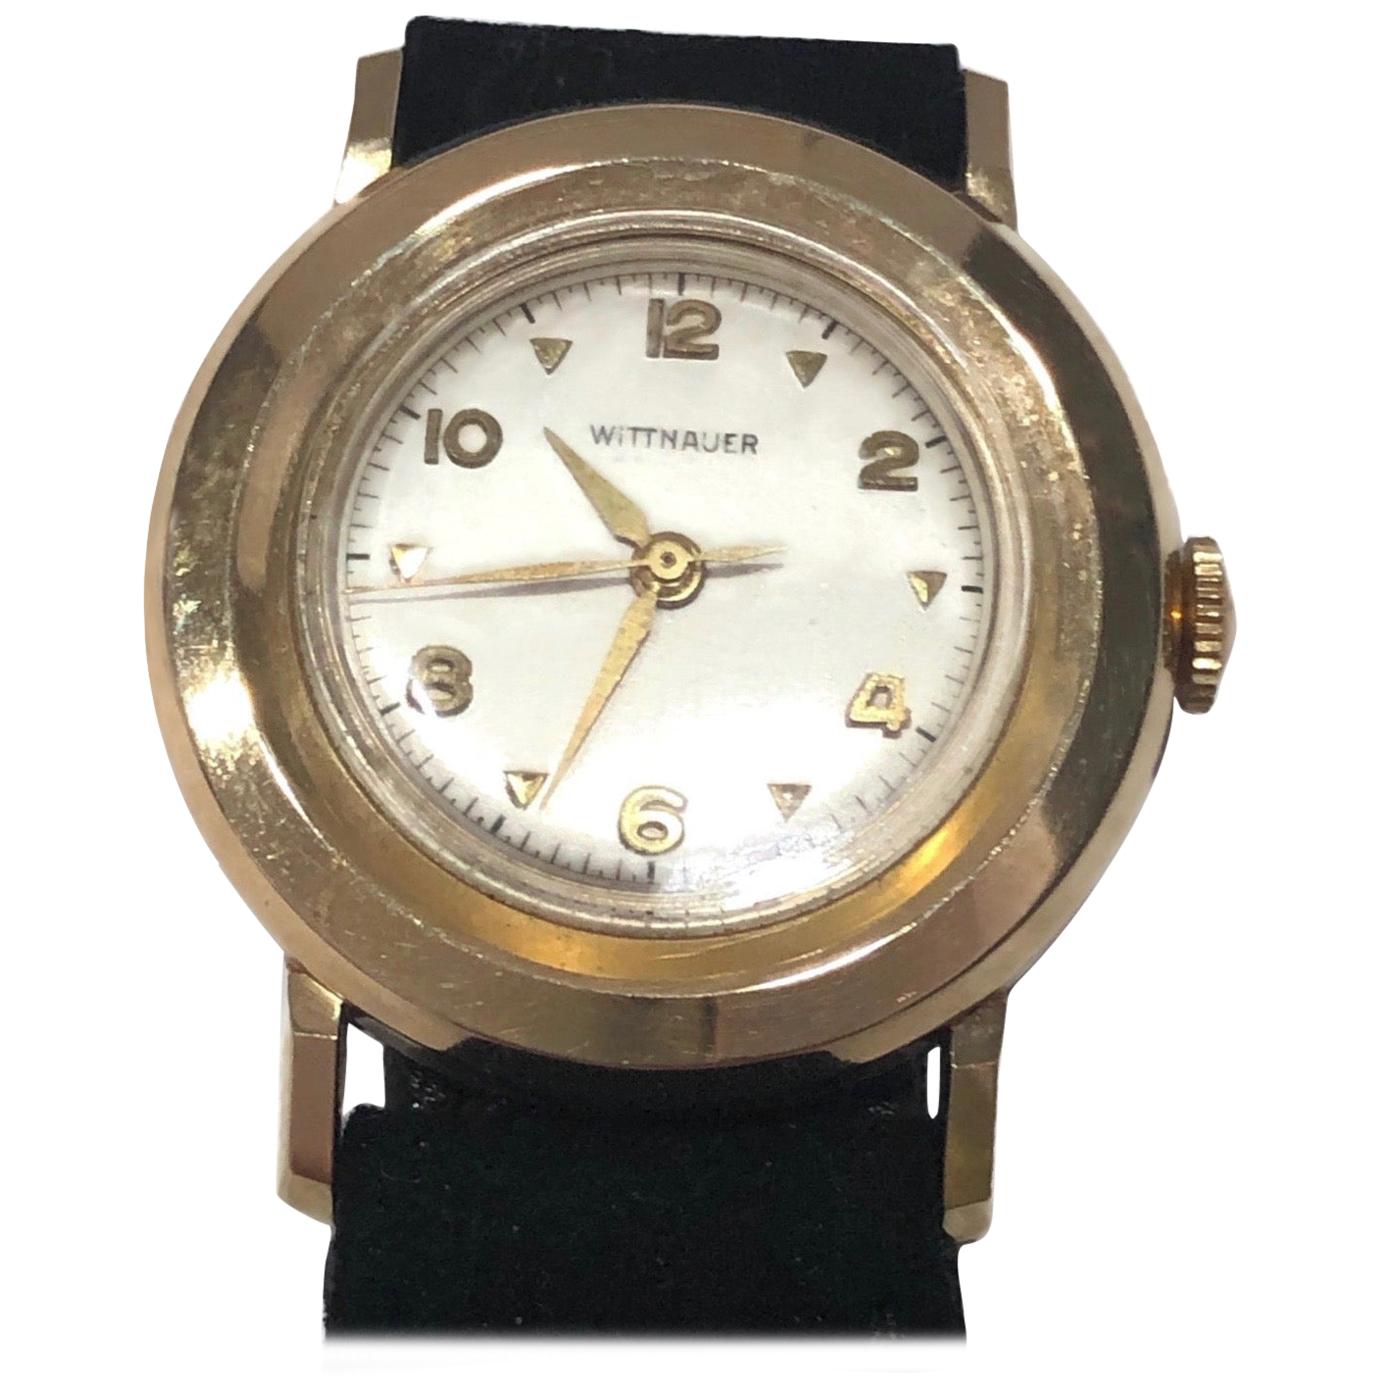 Vintage Deco 14 Karat Gold Wittnauer Automatic Watch with Original Suede Band For Sale